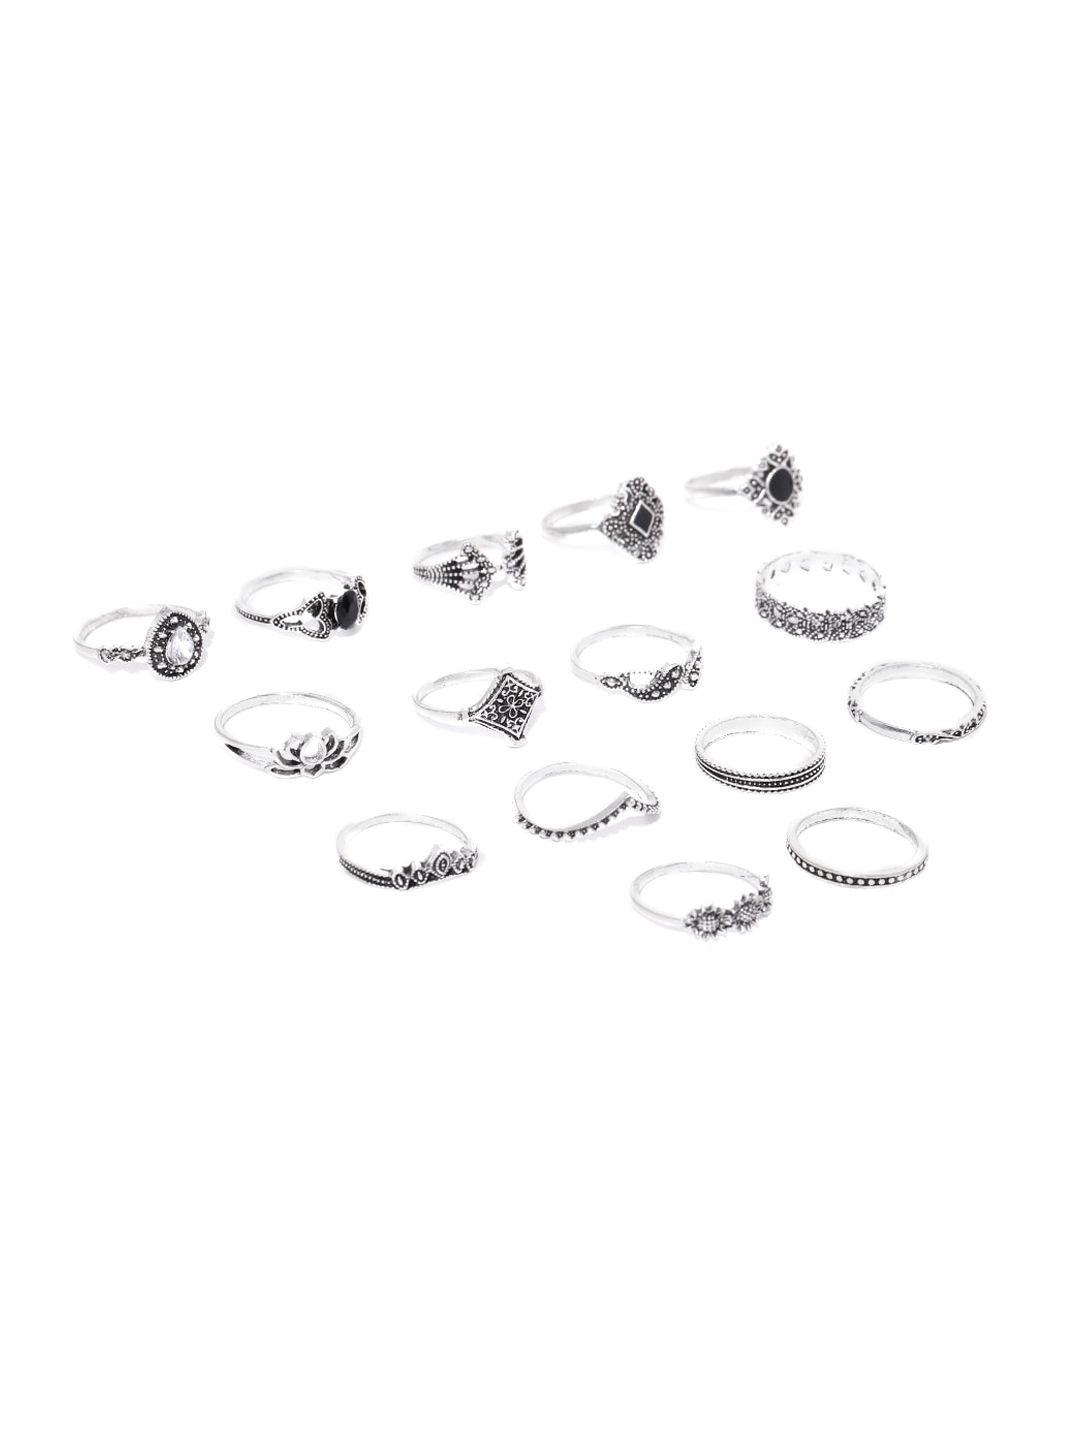 jewels galaxy set of 15 silver-plated oxidized stone studded finger rings